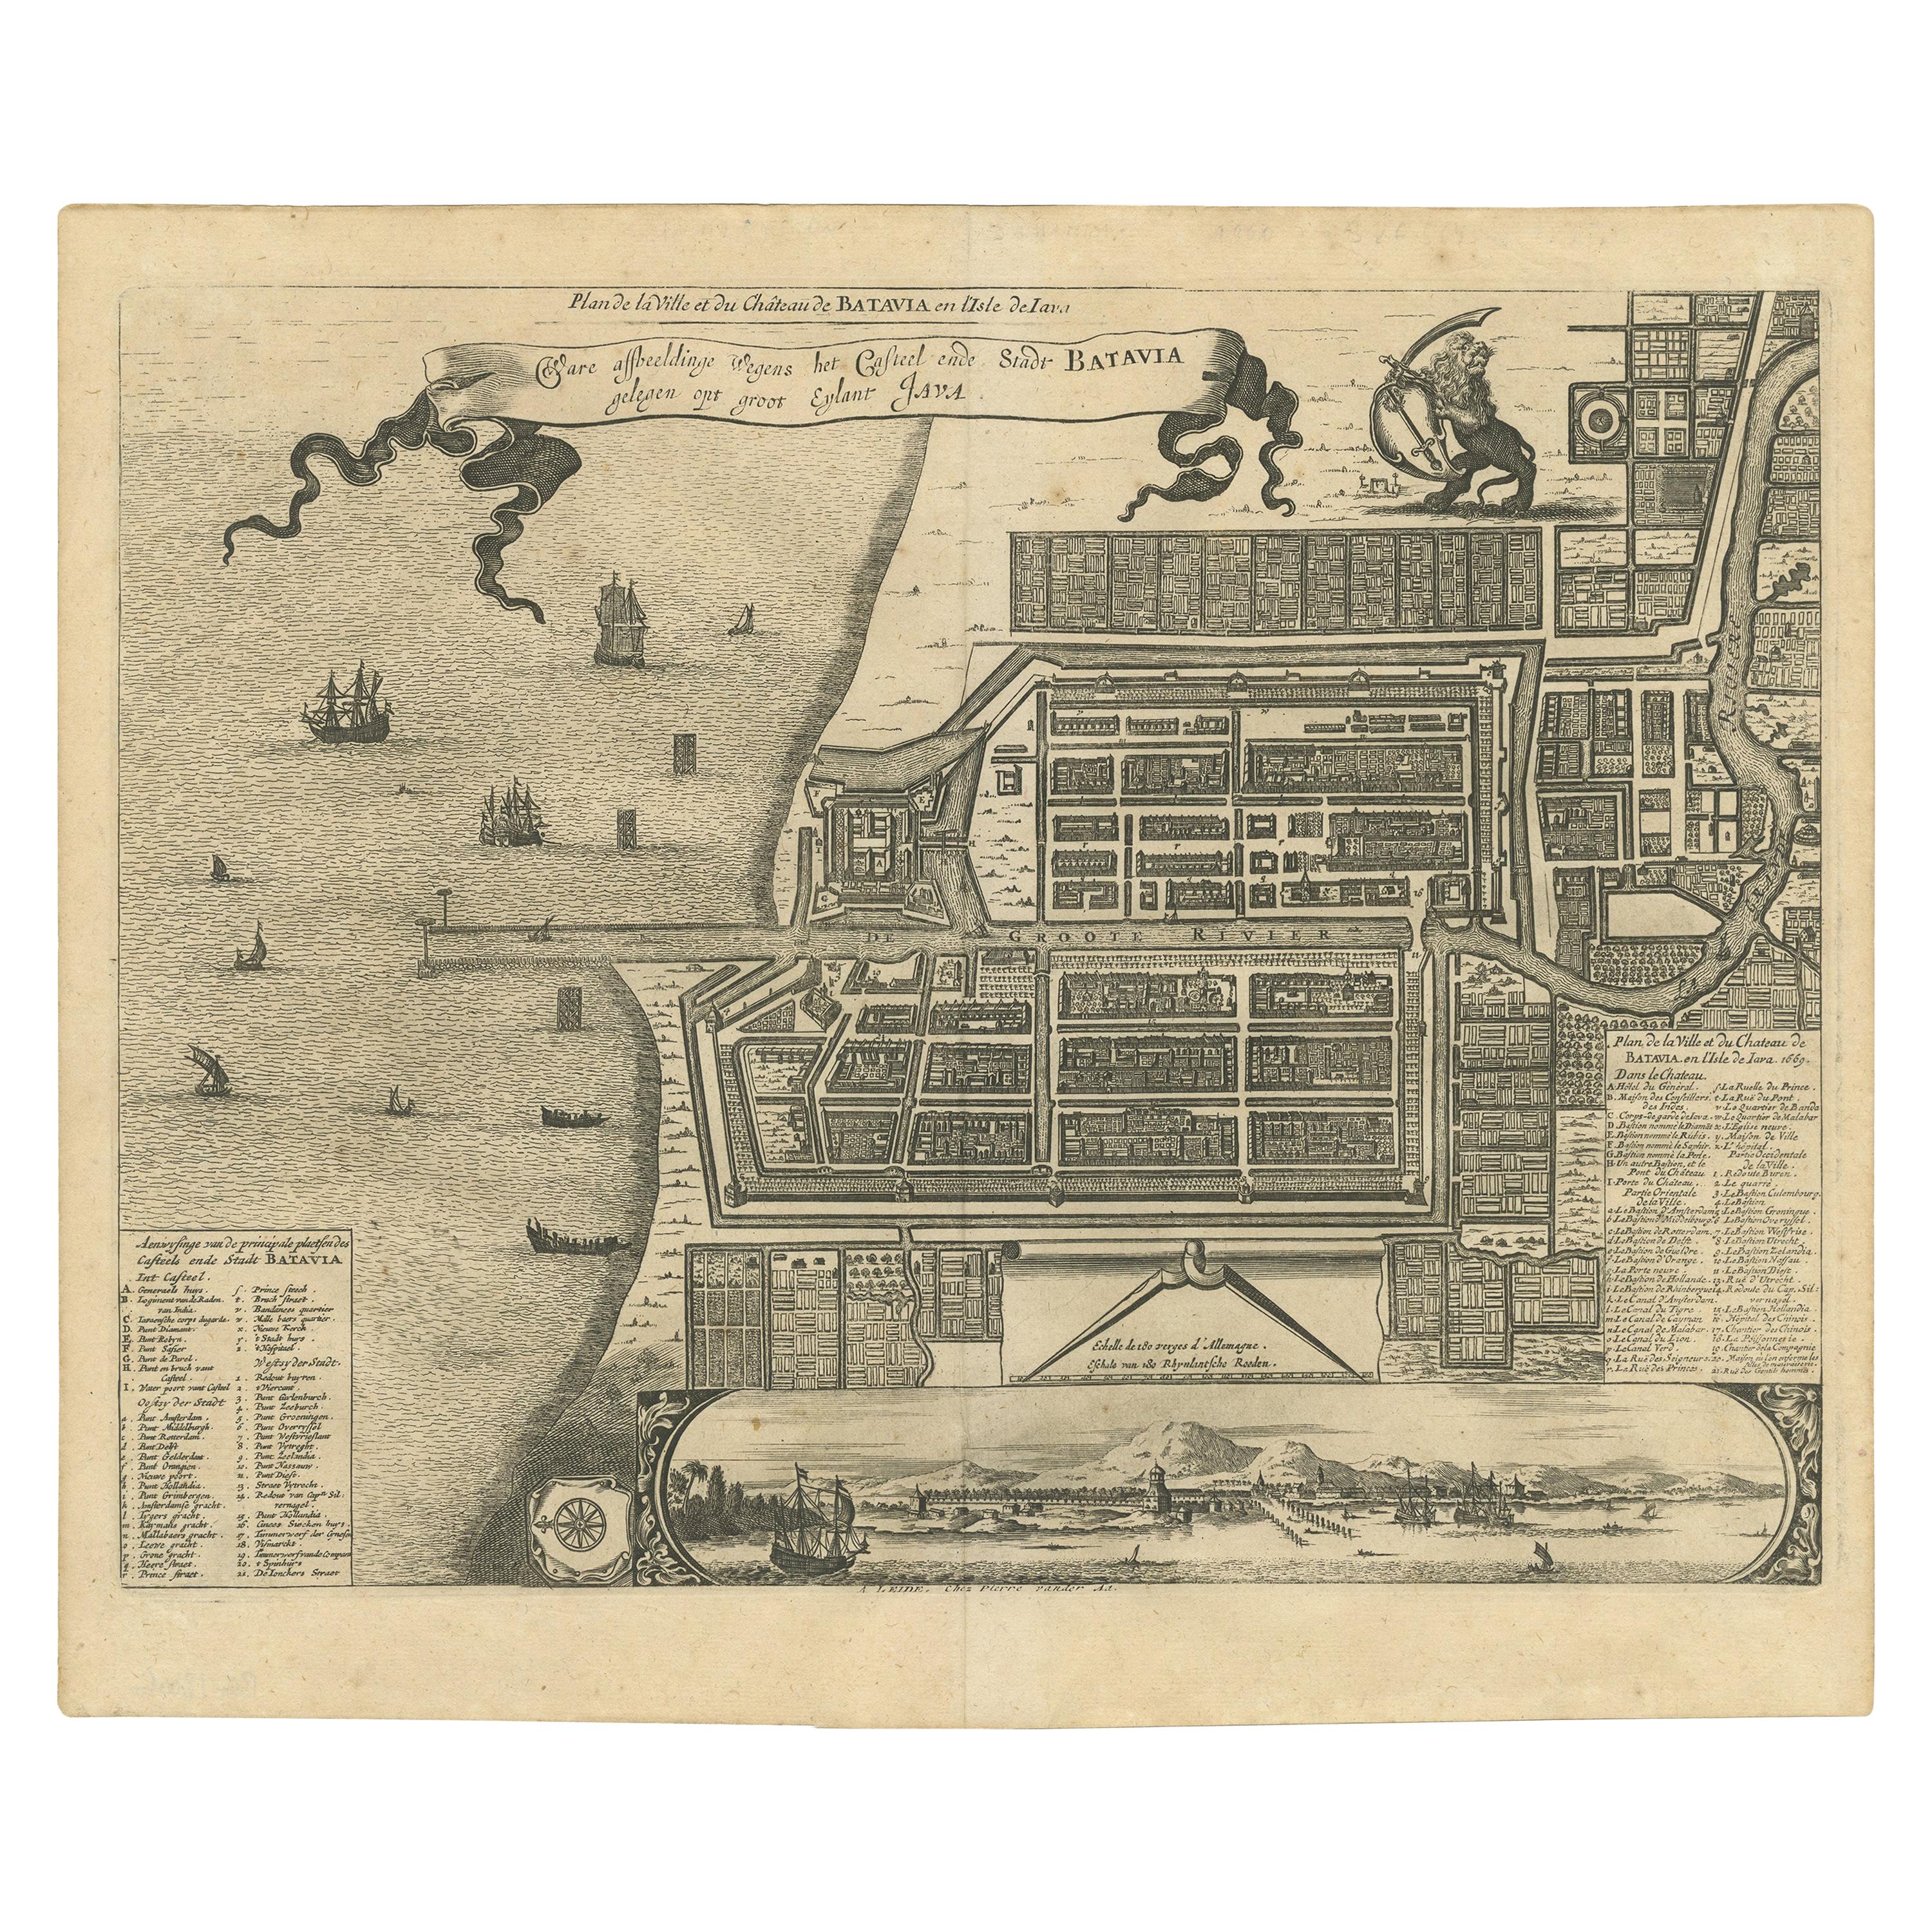 Antique Map of the City of Batavia by Van der Aa 'c.1730' For Sale